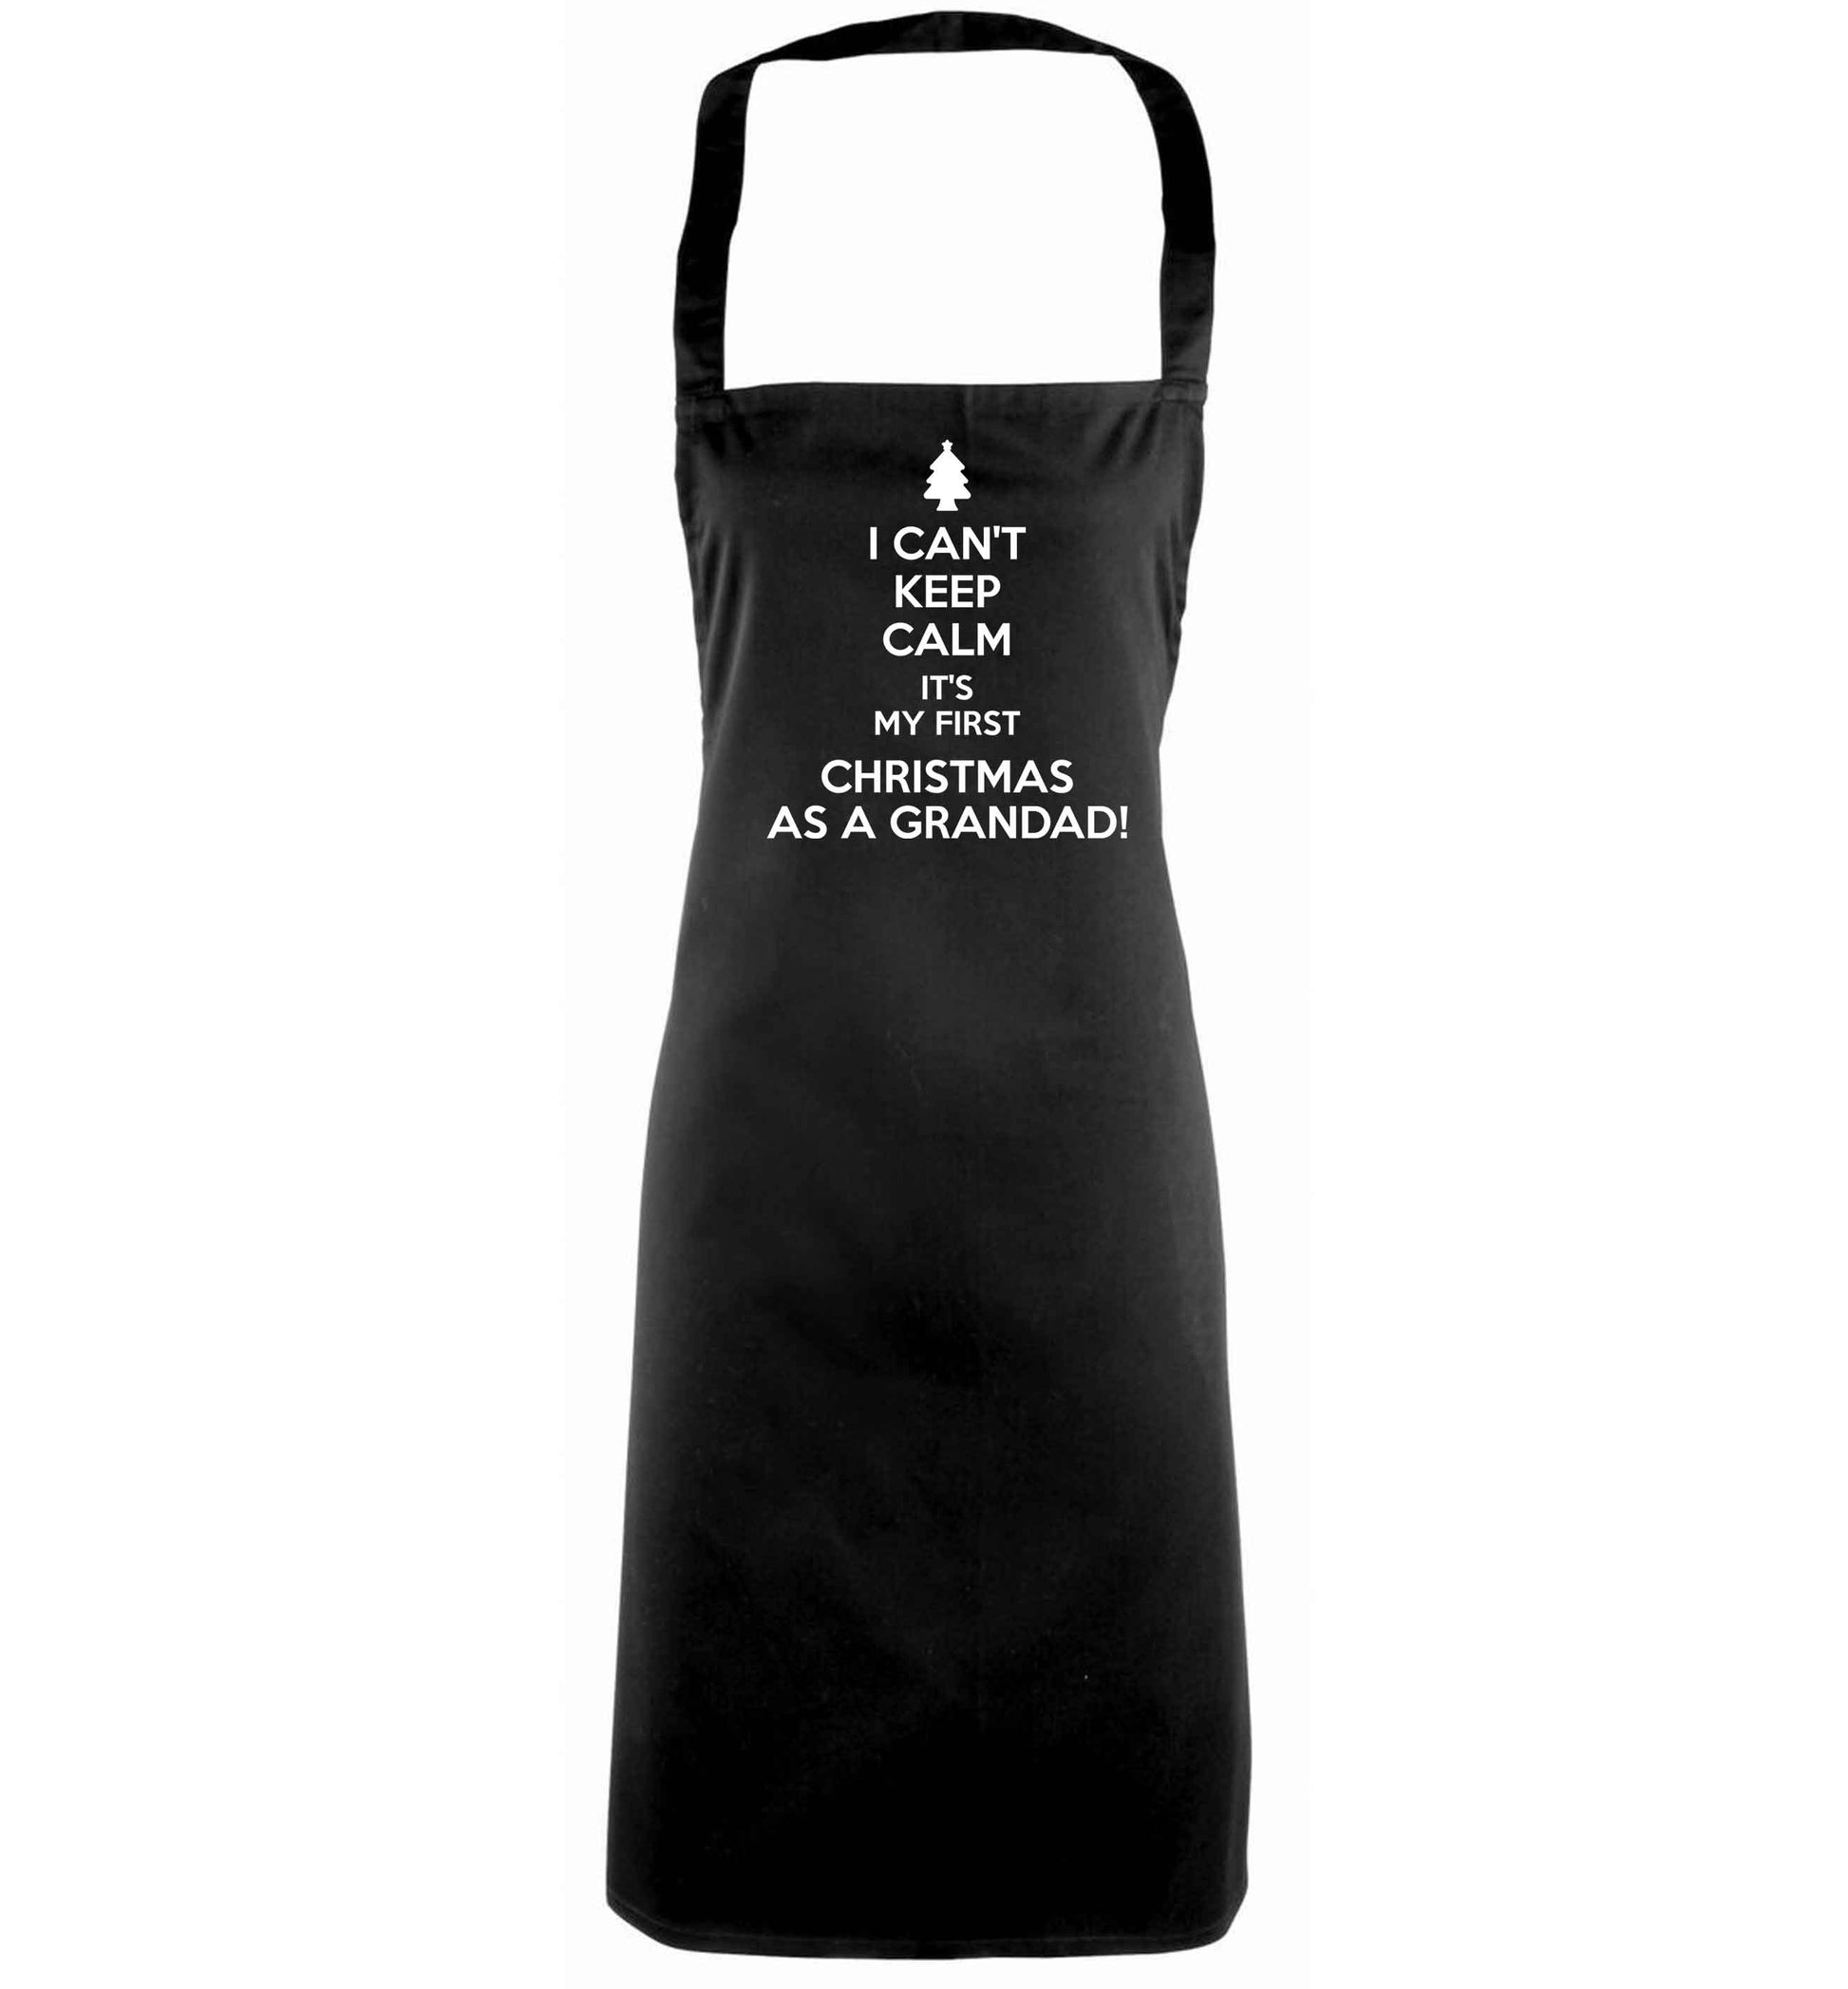 I can't keep calm it's my first Christmas as a grandad! black apron